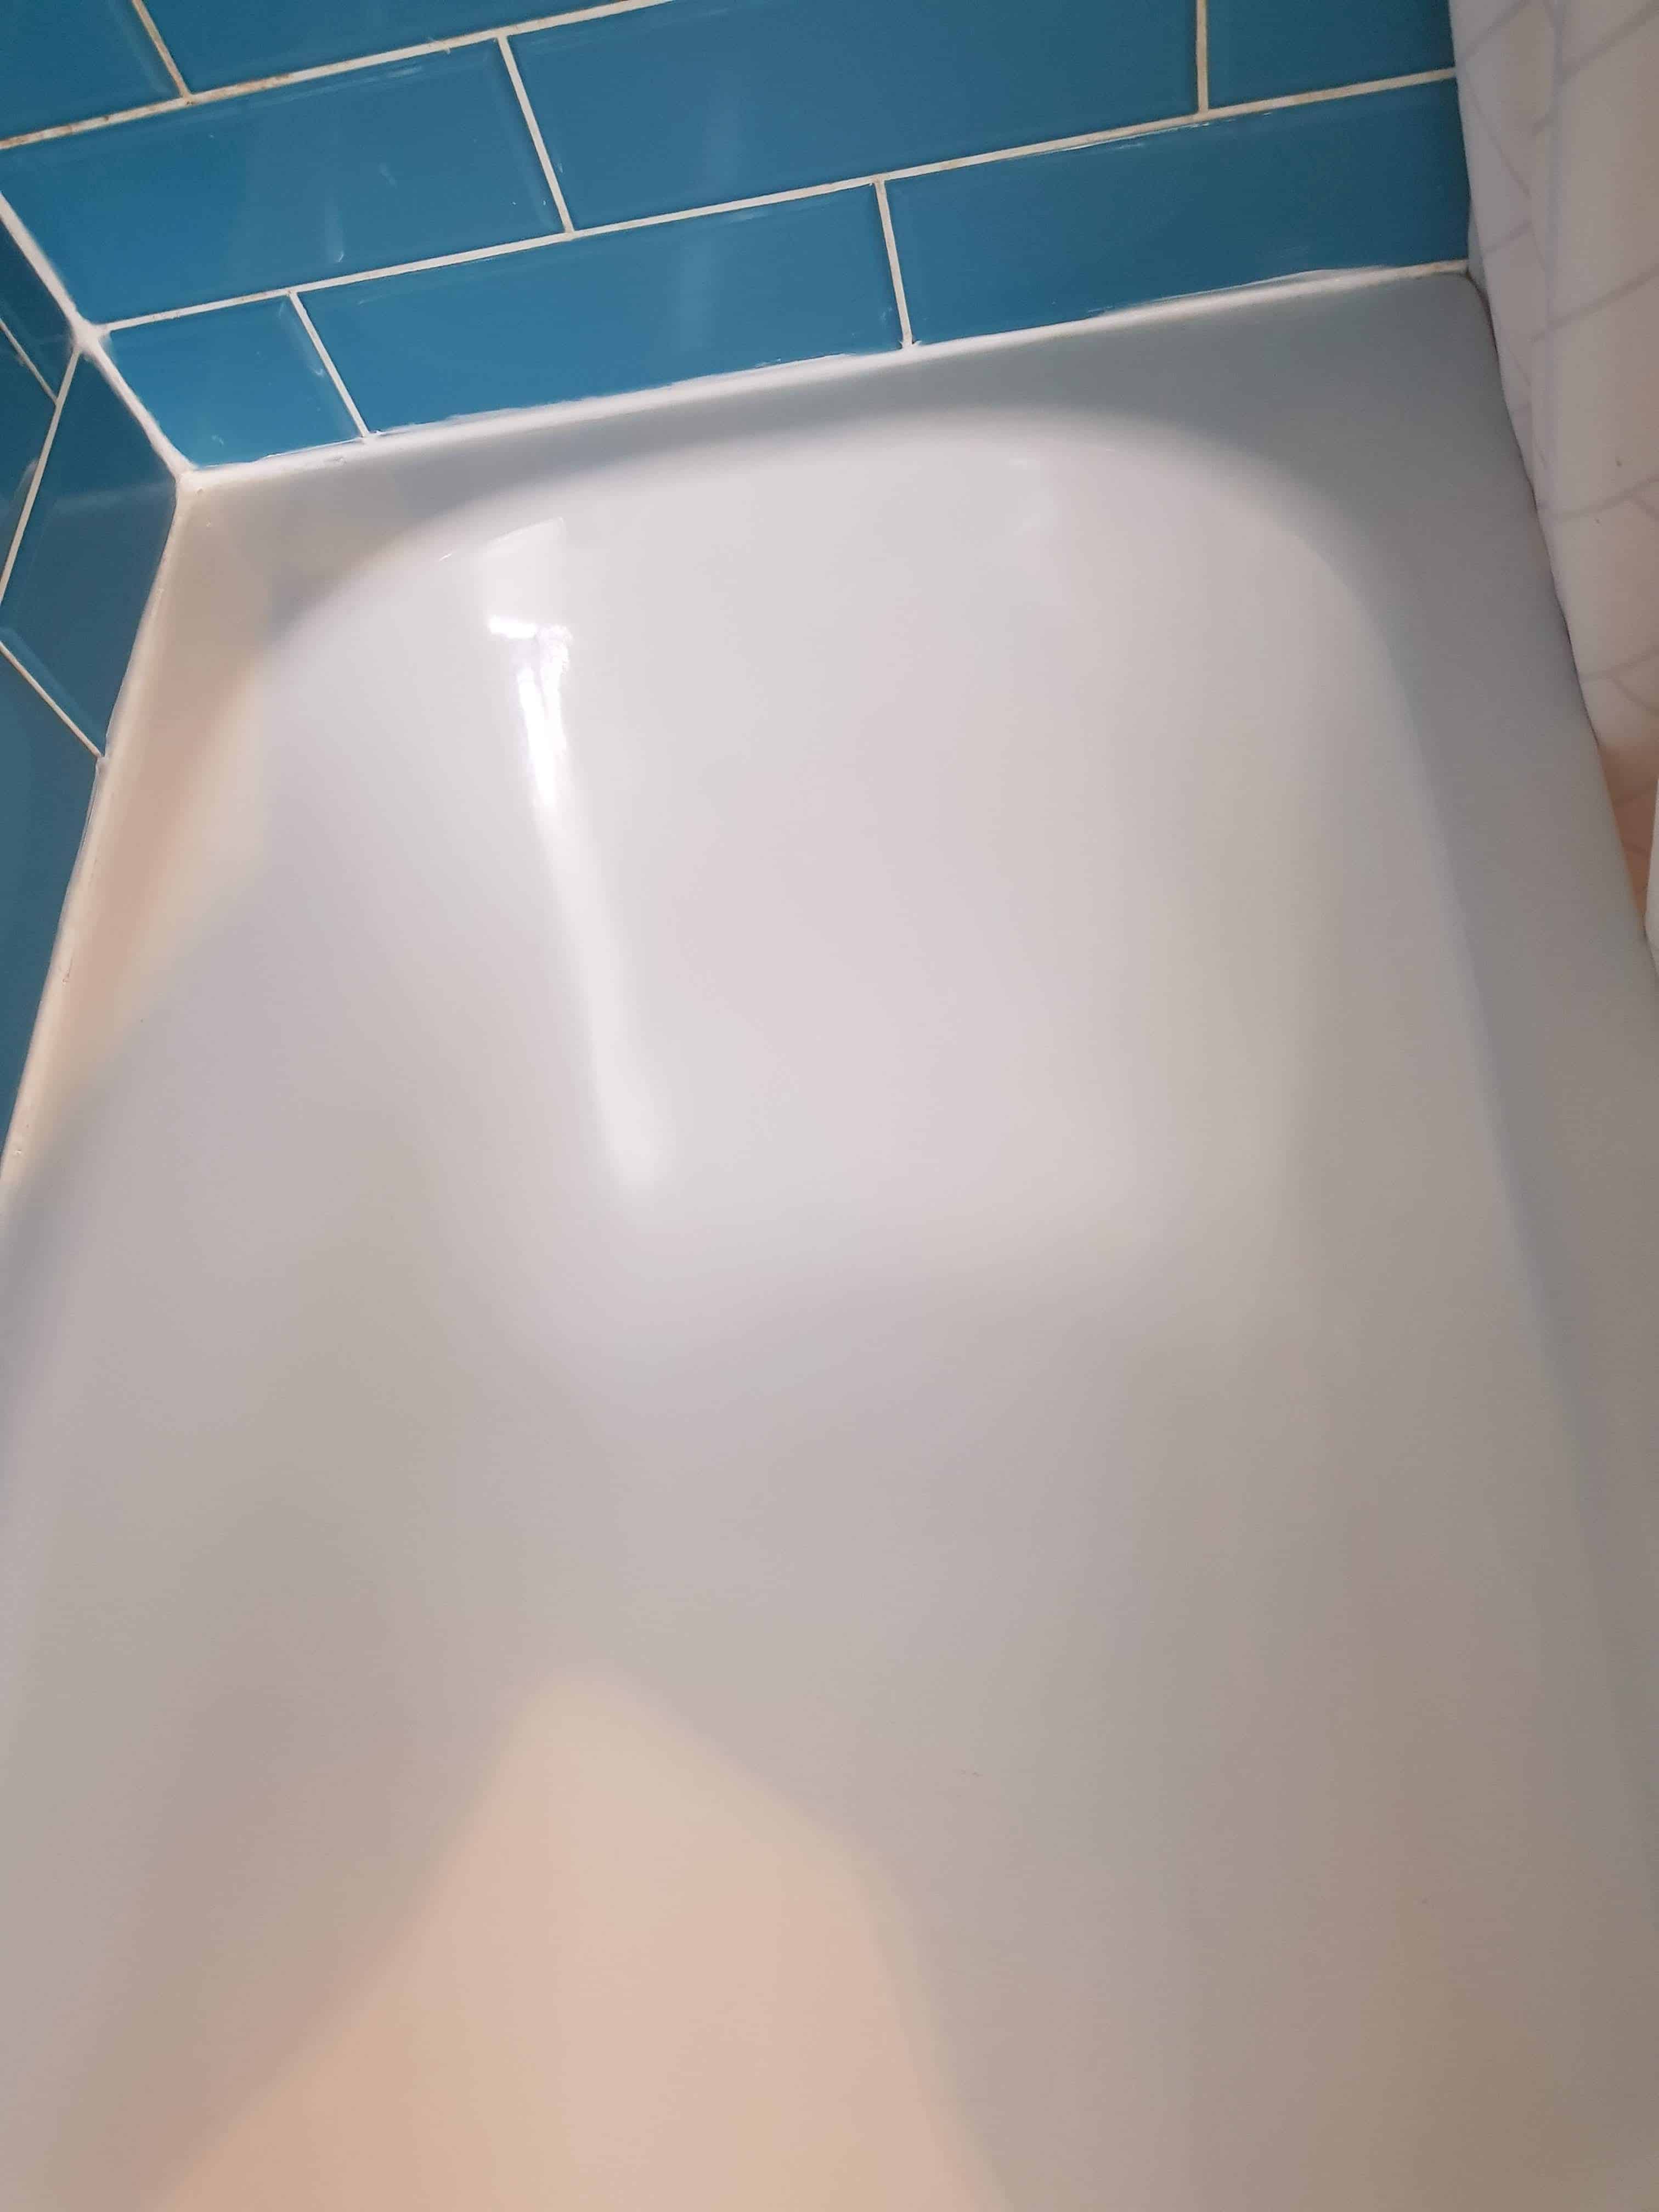 5 examples of time and cost effective bath enamel repair. 5